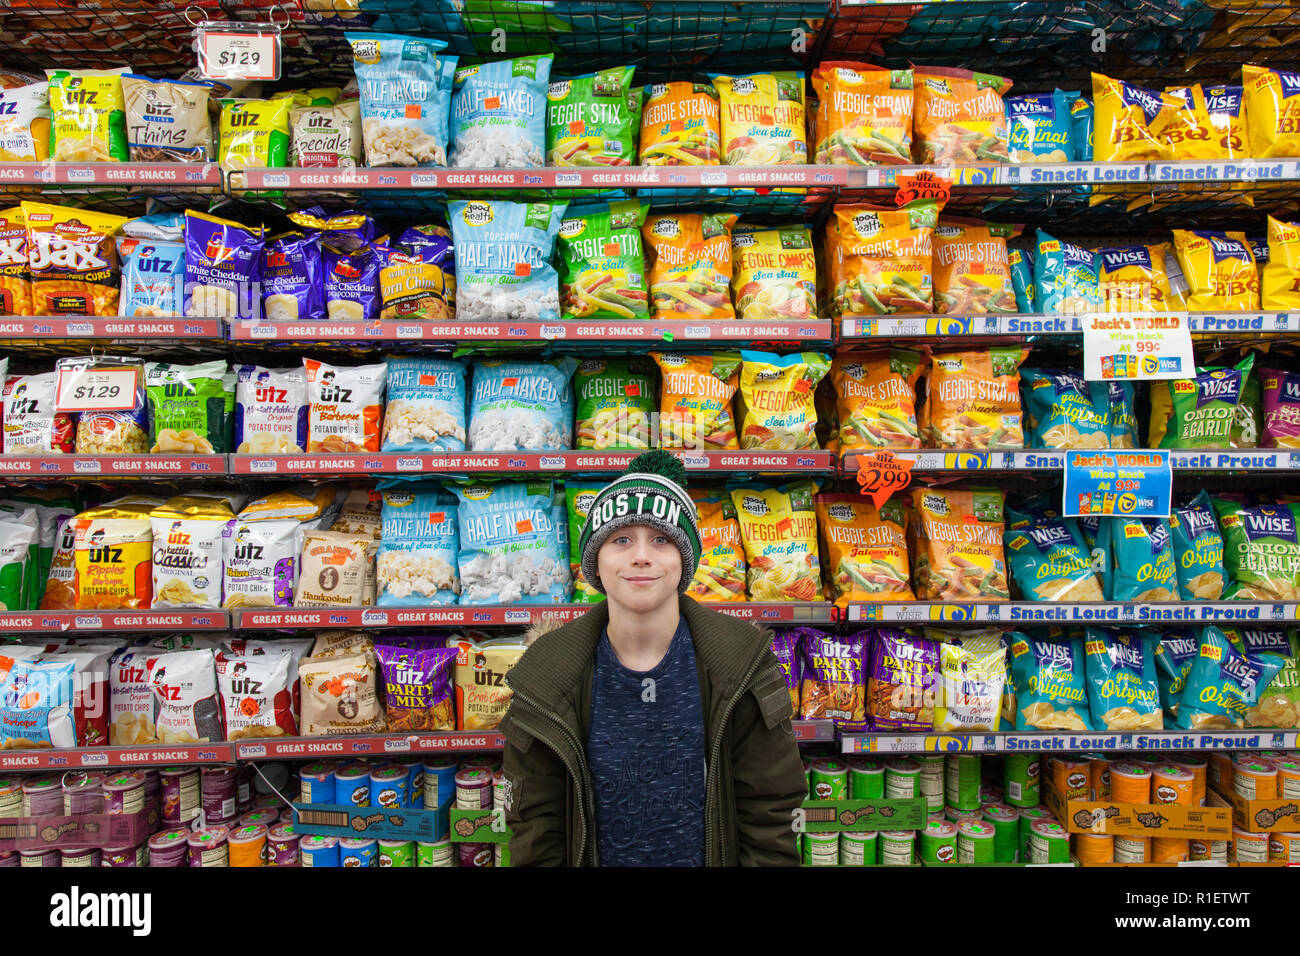 Nine year old boy in front of shelves of potato crisps, Jacks store, Midtown, New York City, United States of America. Stock Photo